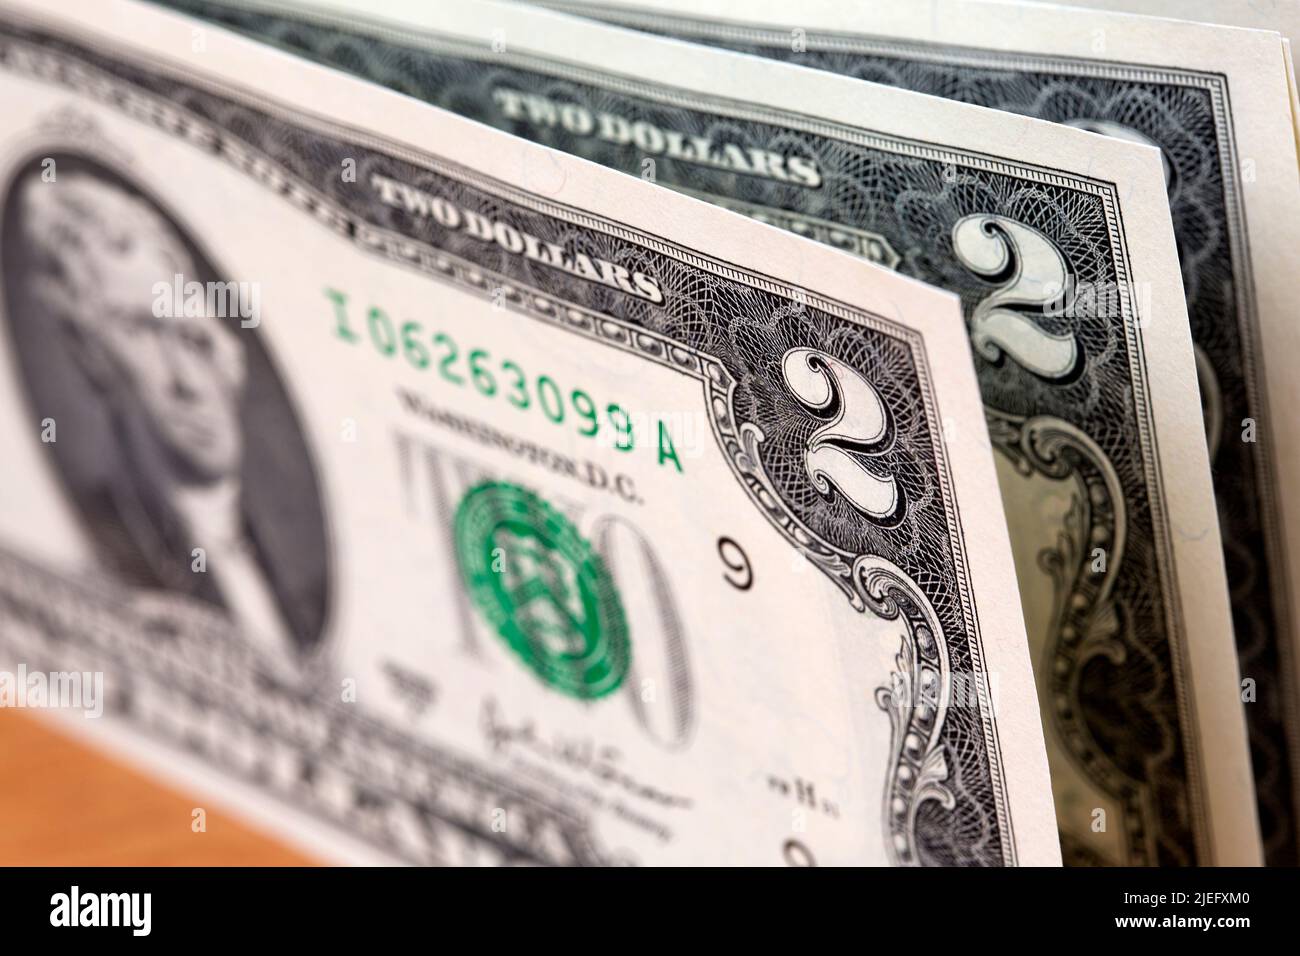 American money - 2 dollars a business background Stock Photo